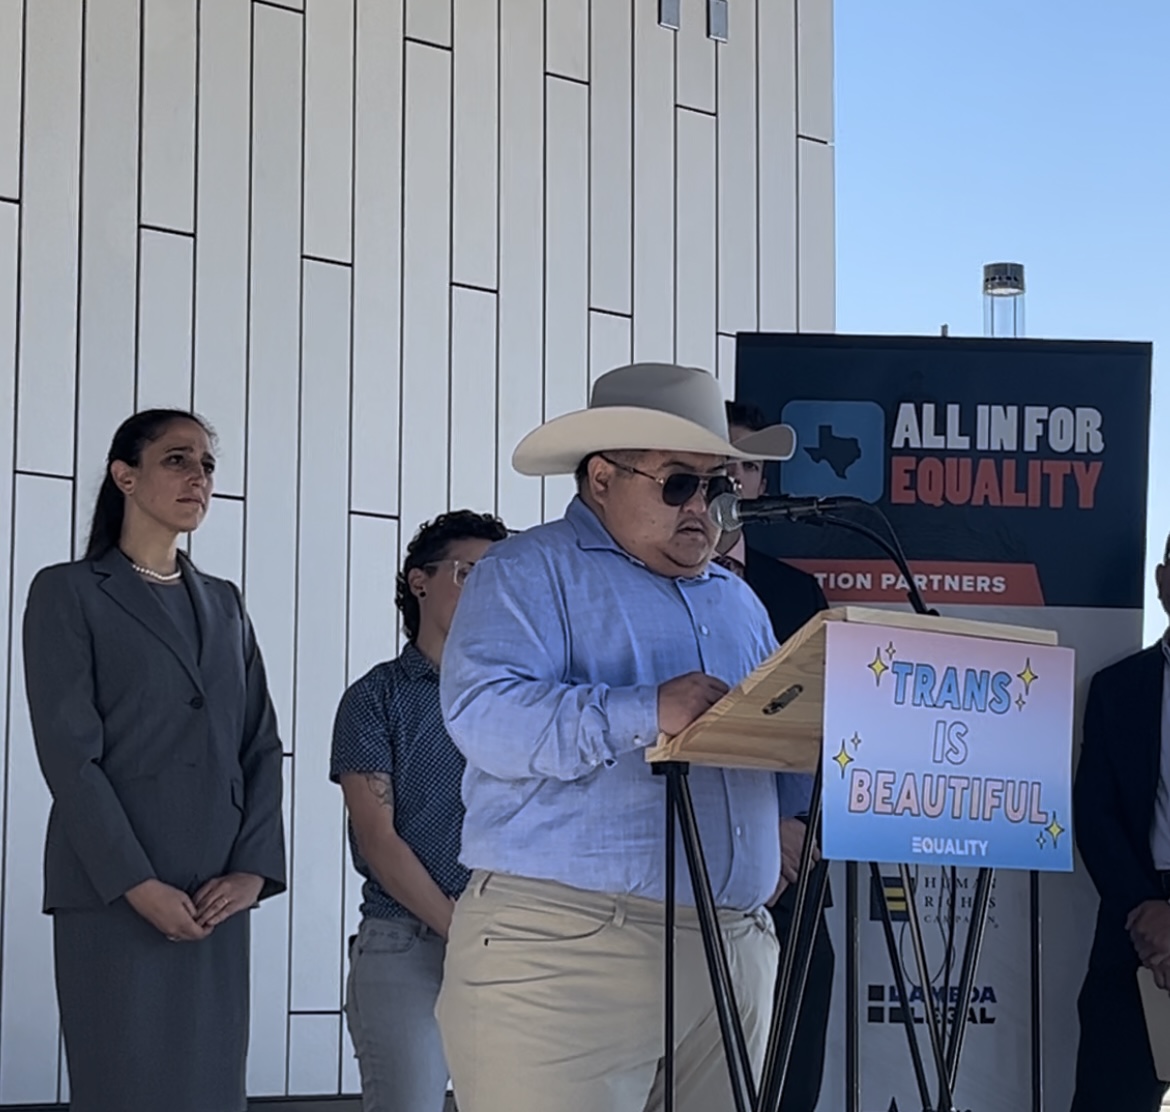 Photo of Emmett, a South Korean American trans man, wearing a beige cowboy hat, dark sunglasses, and blue shirt, standing behind a podium with a Trans is Beautiful sign on it. Lynly is a white cisgender woman, wearing a gray jacket and skirt, standing behind Emmett.